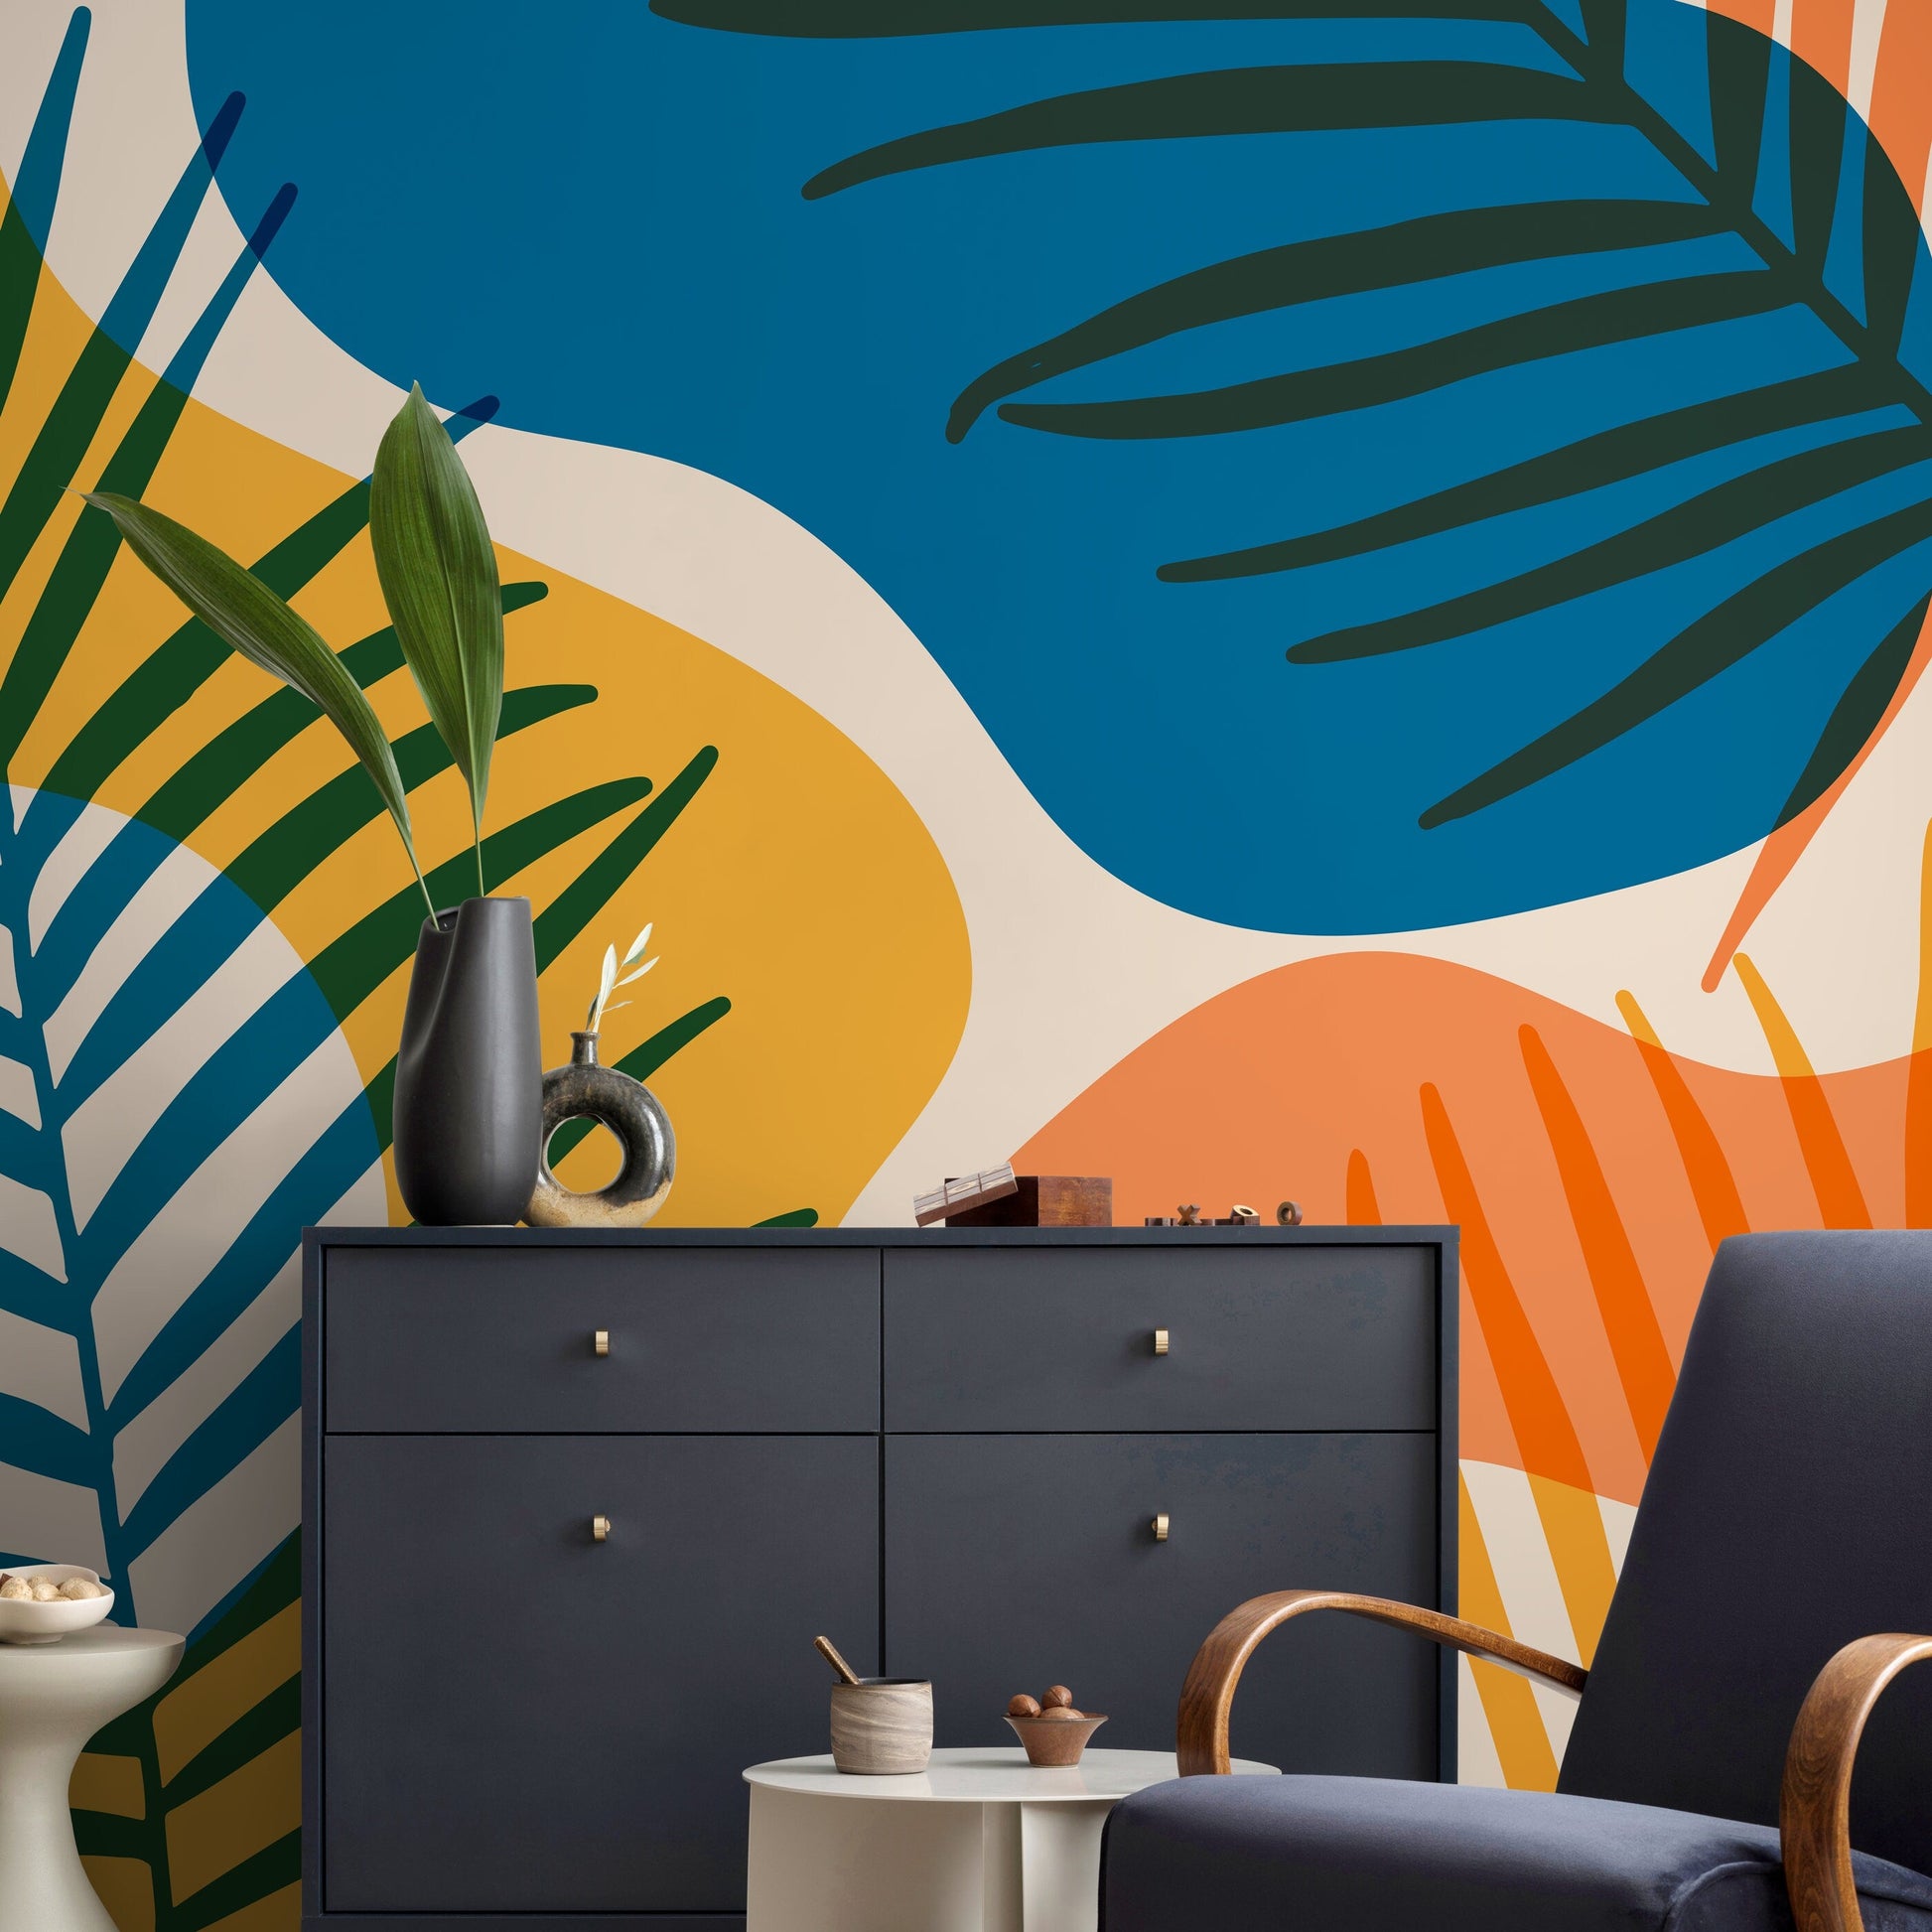 Colorful Palms Mural Removable Wallpaper Wall Tropical - B959